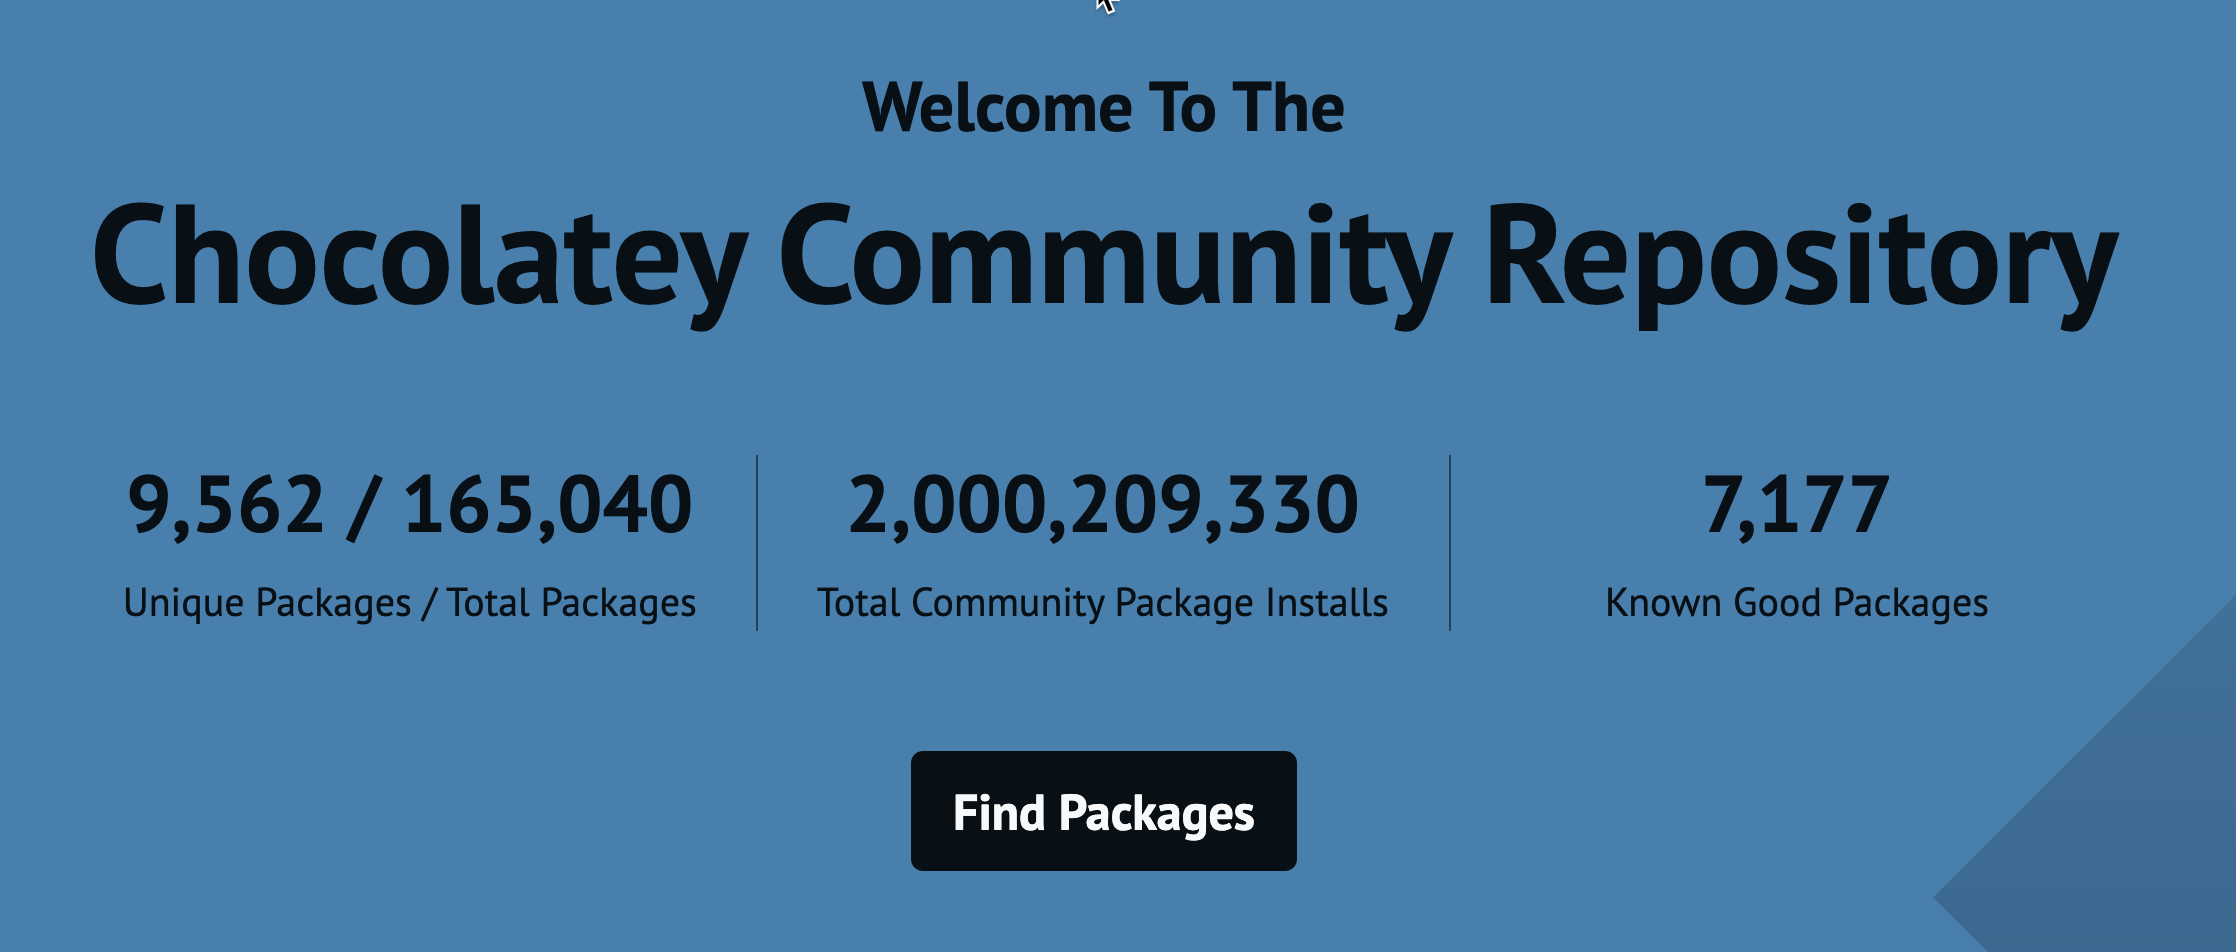 Chocolatey Chocolatey Repository package download counter showing over 2 billion package downloads'